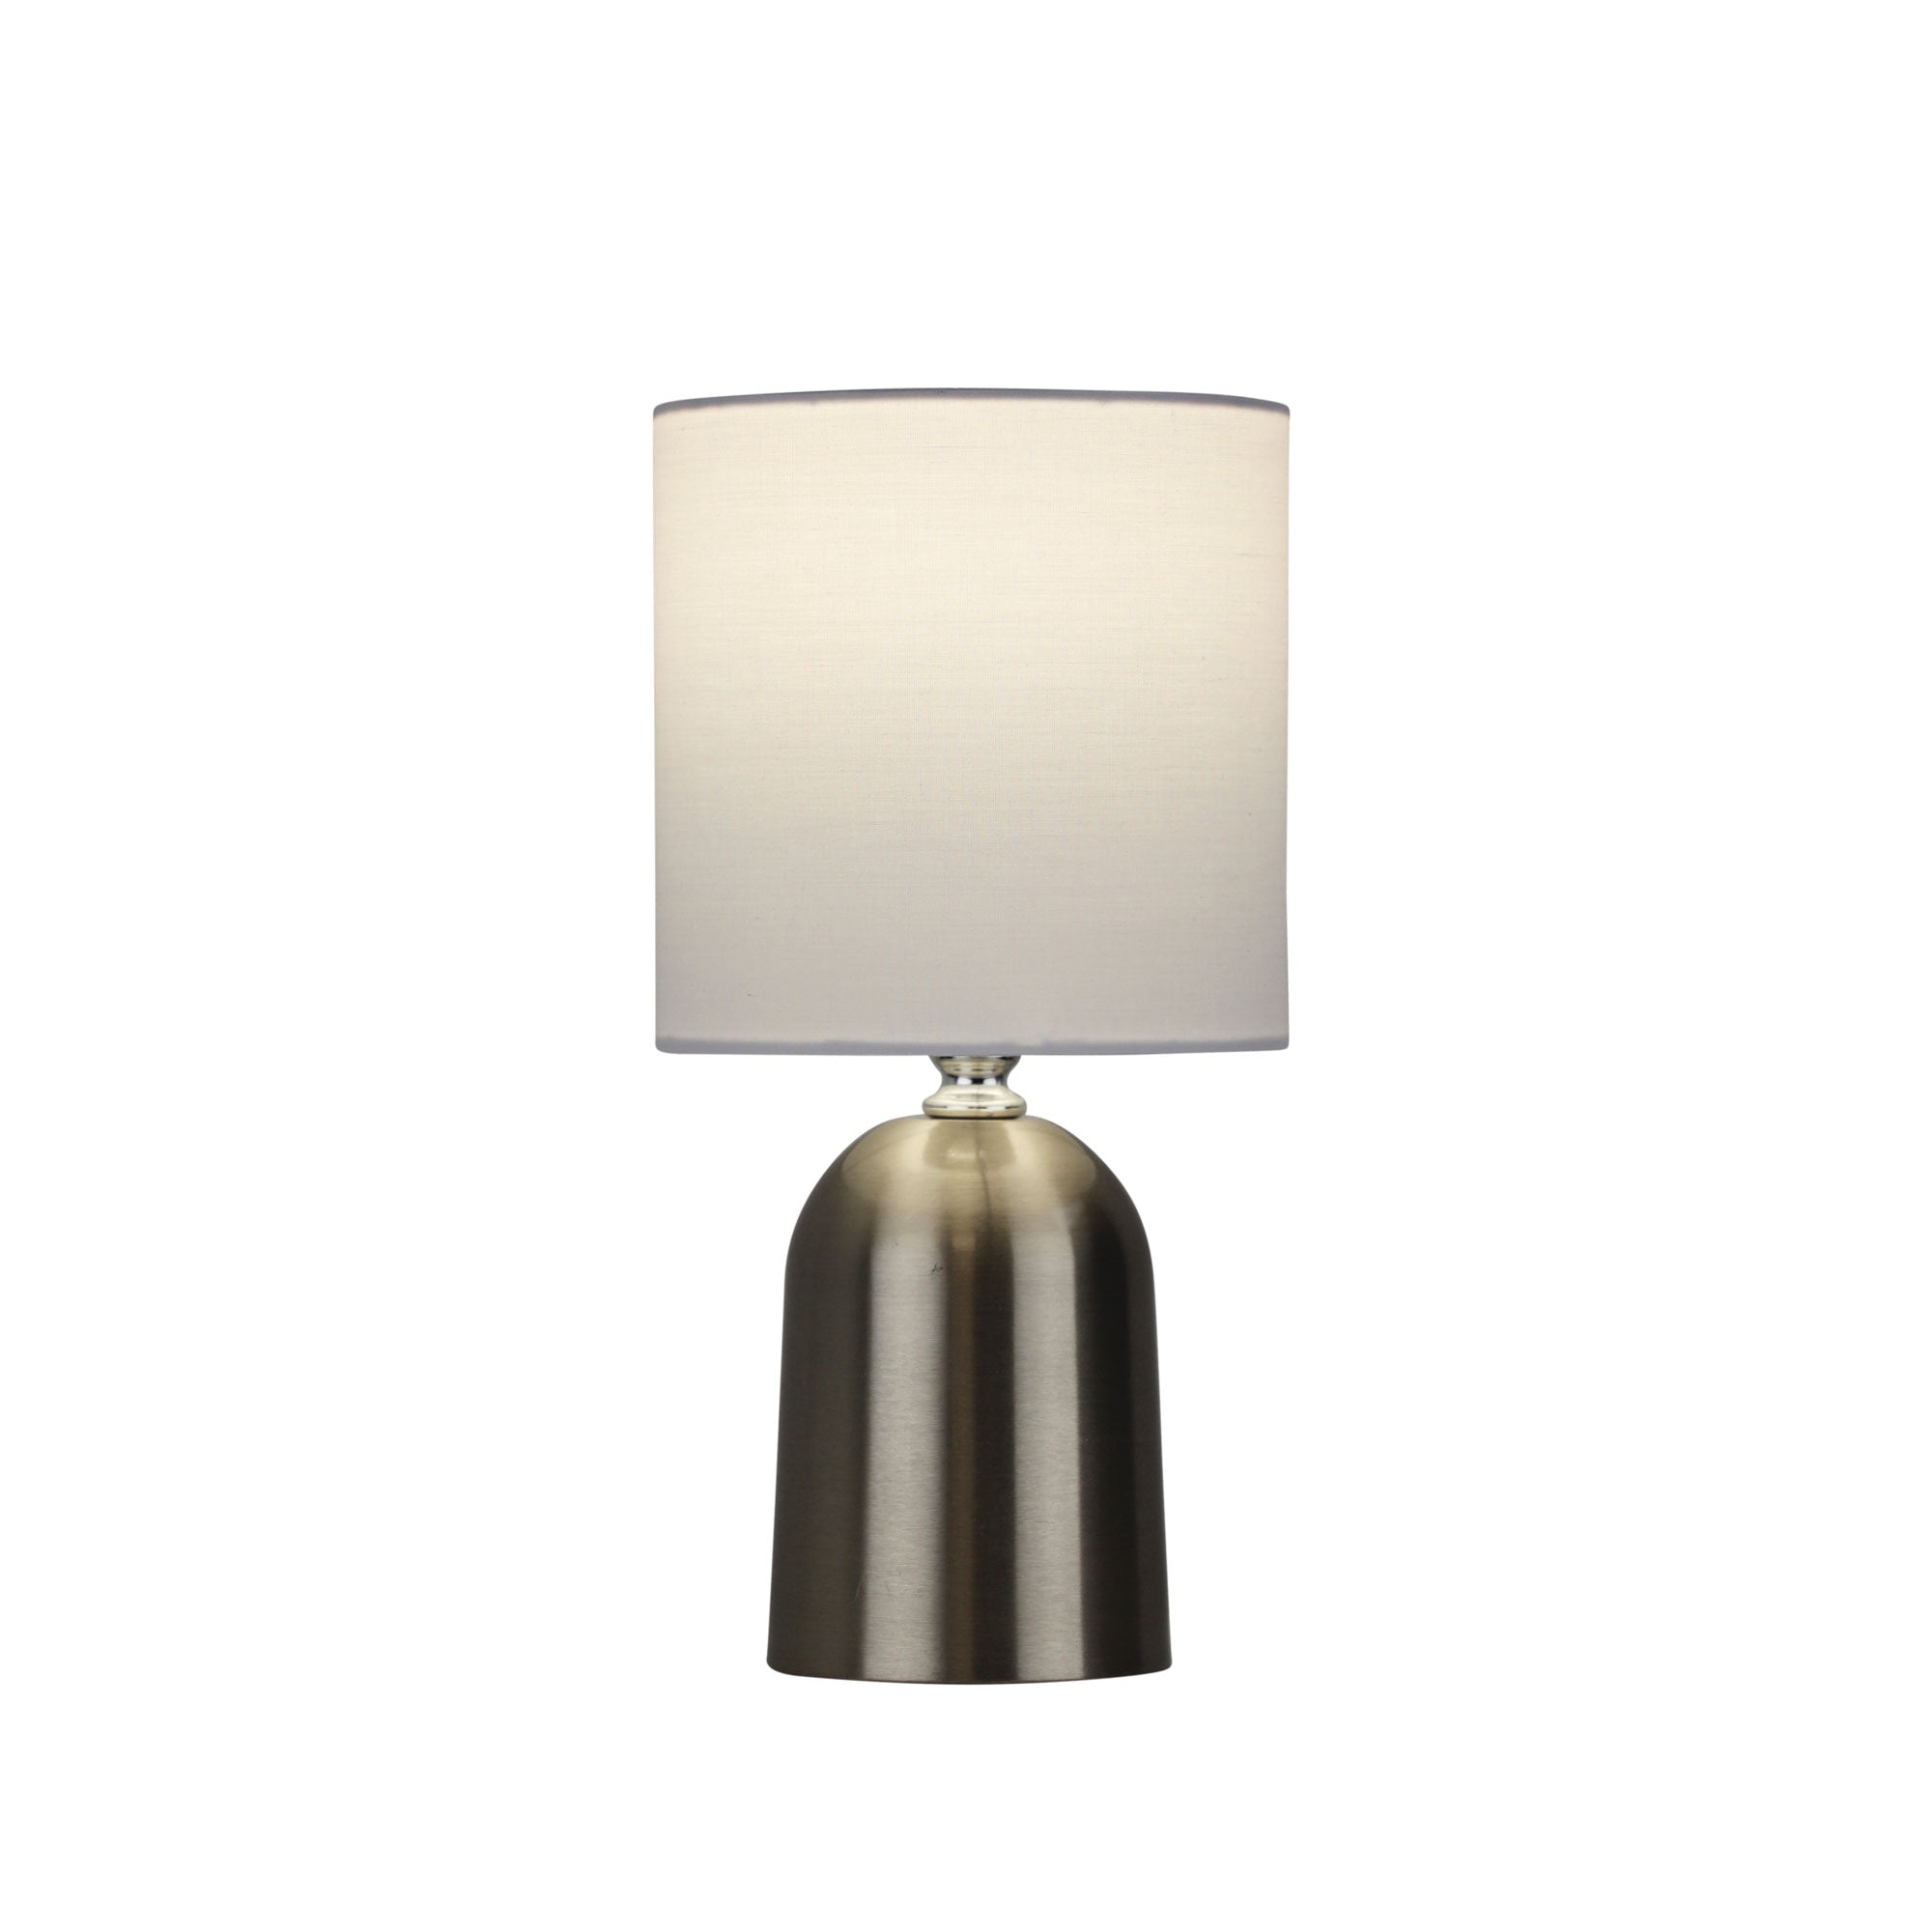 Espen Touch Table Lamp Brushed Chrome - LF9207BCH